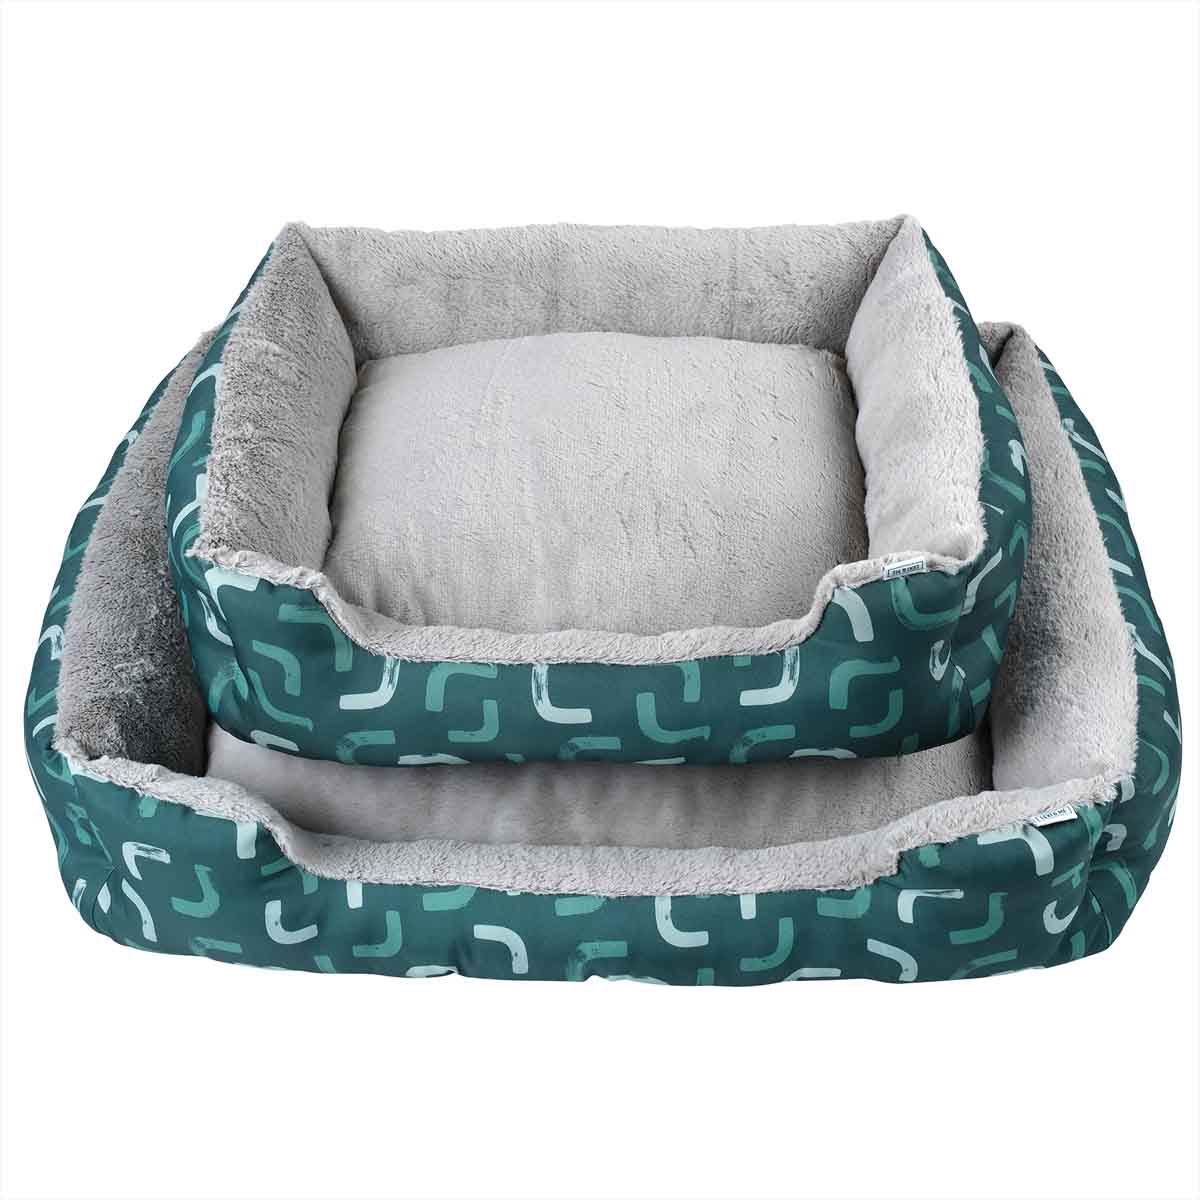 Lexi & Me Bolster Bed Forest Green Curve